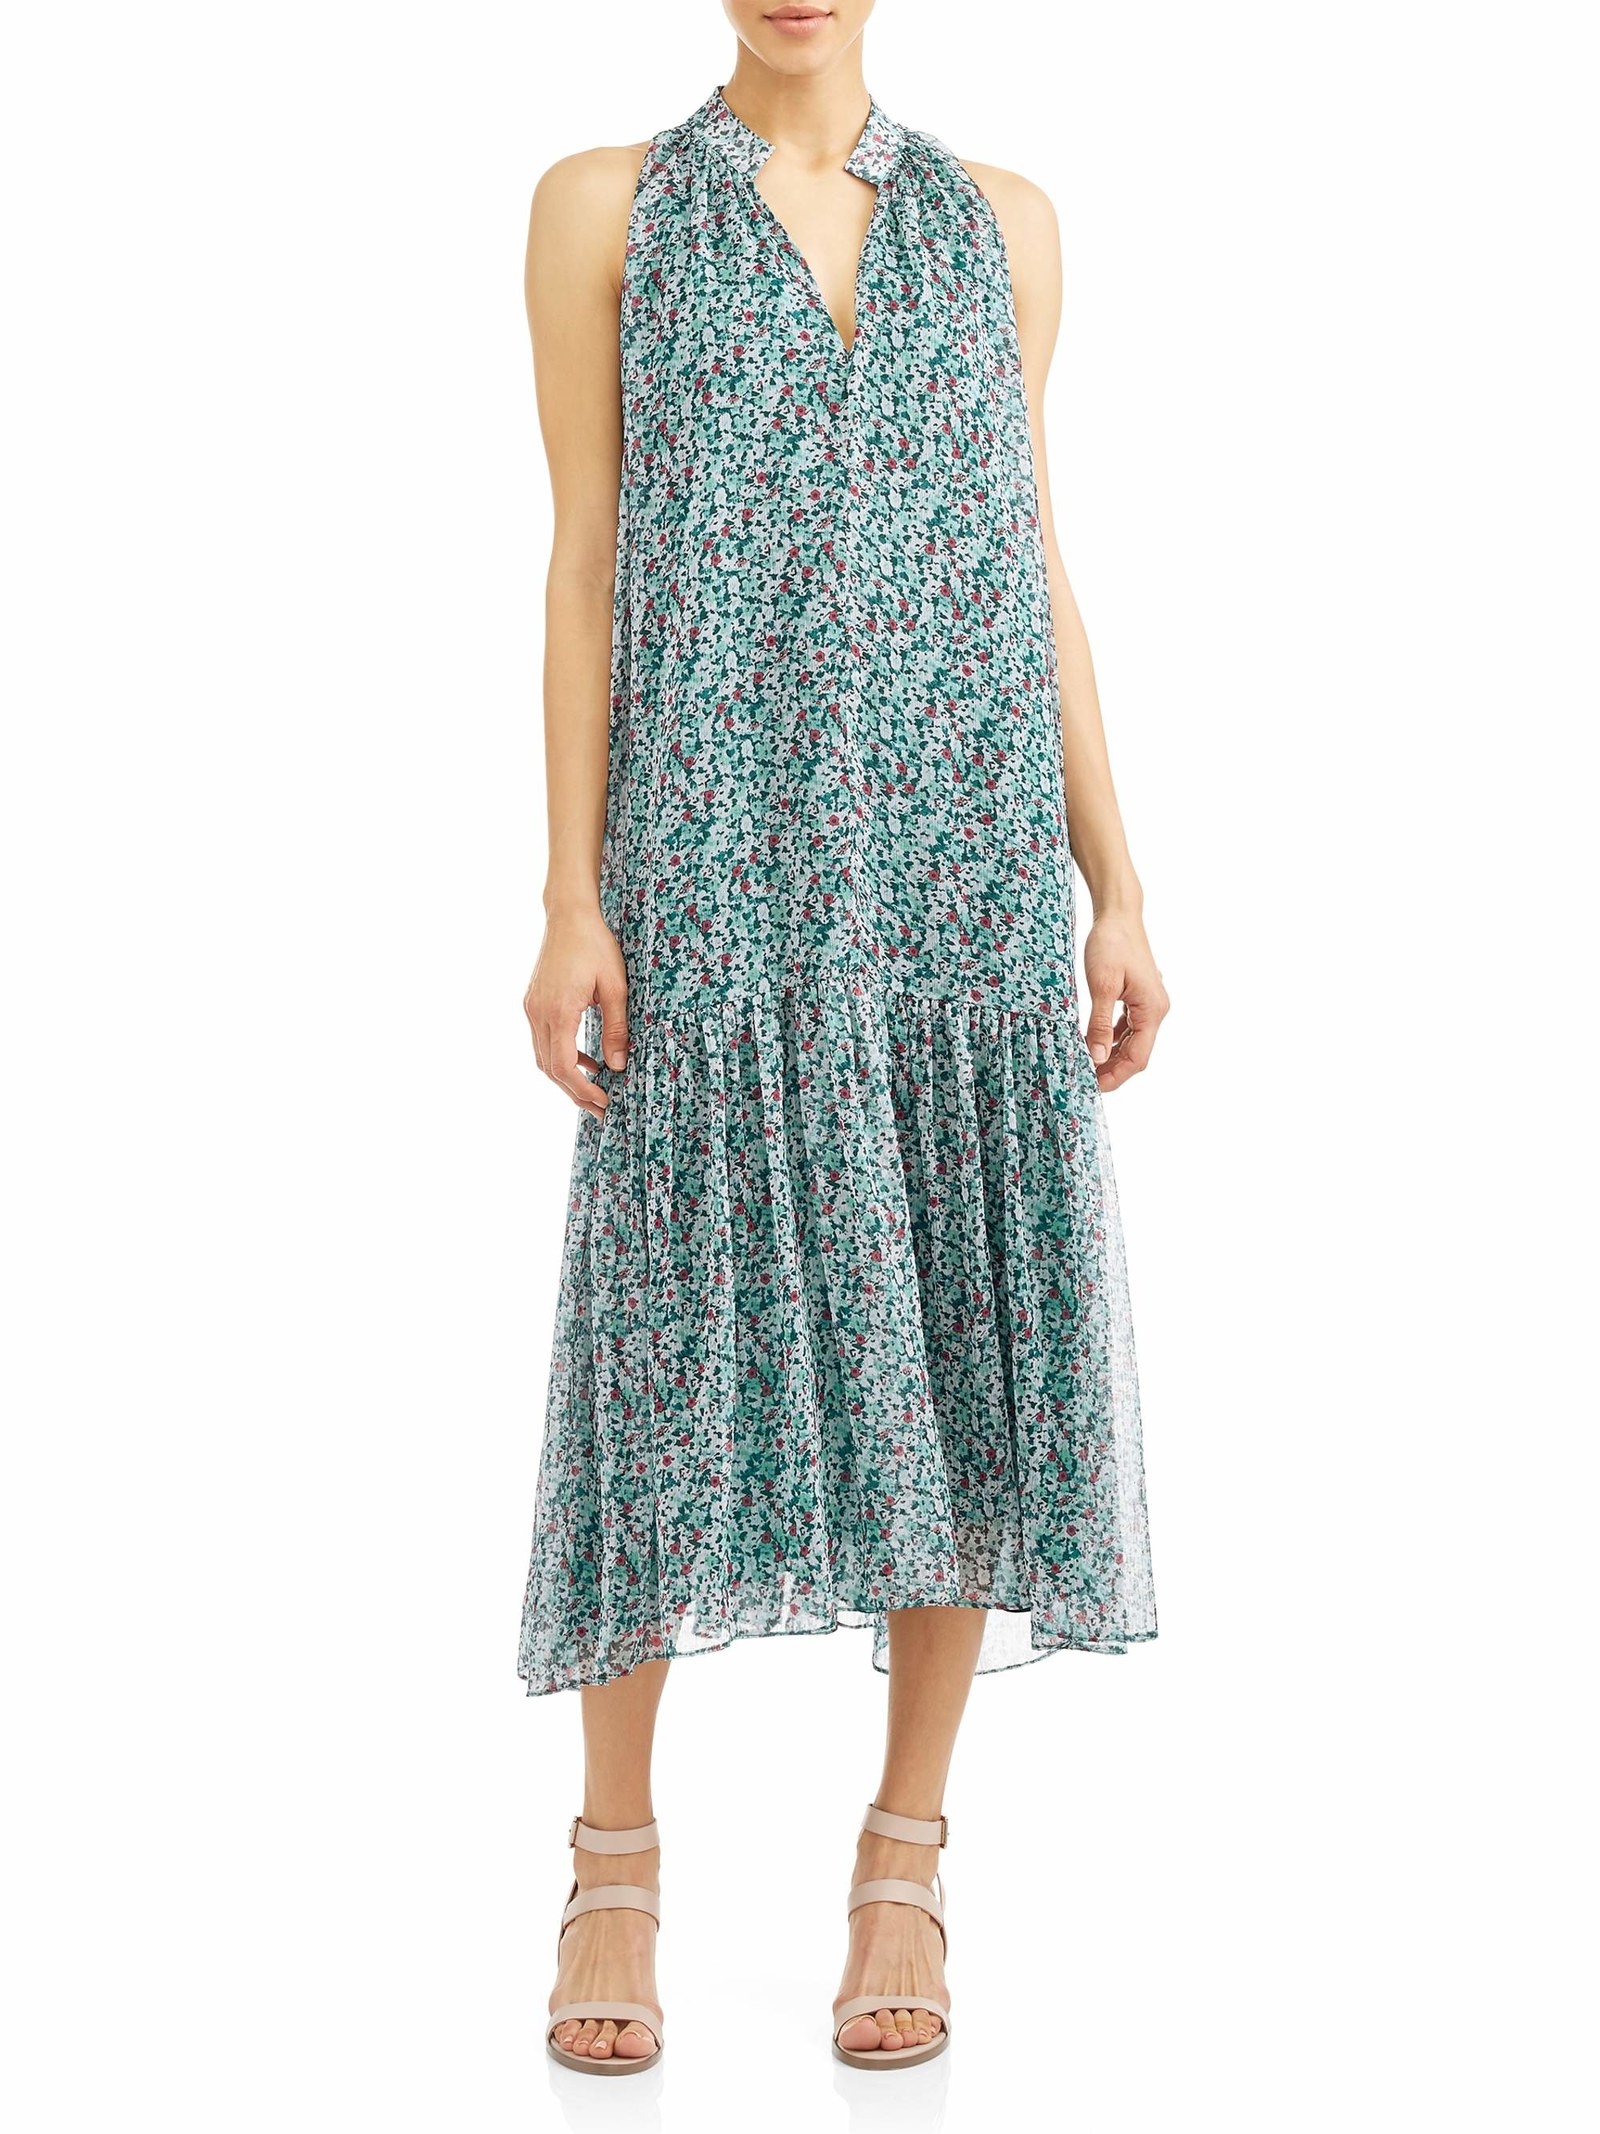 27 Dresses To Wear To A Wedding That Nobody Will Believe You Got At Walmart